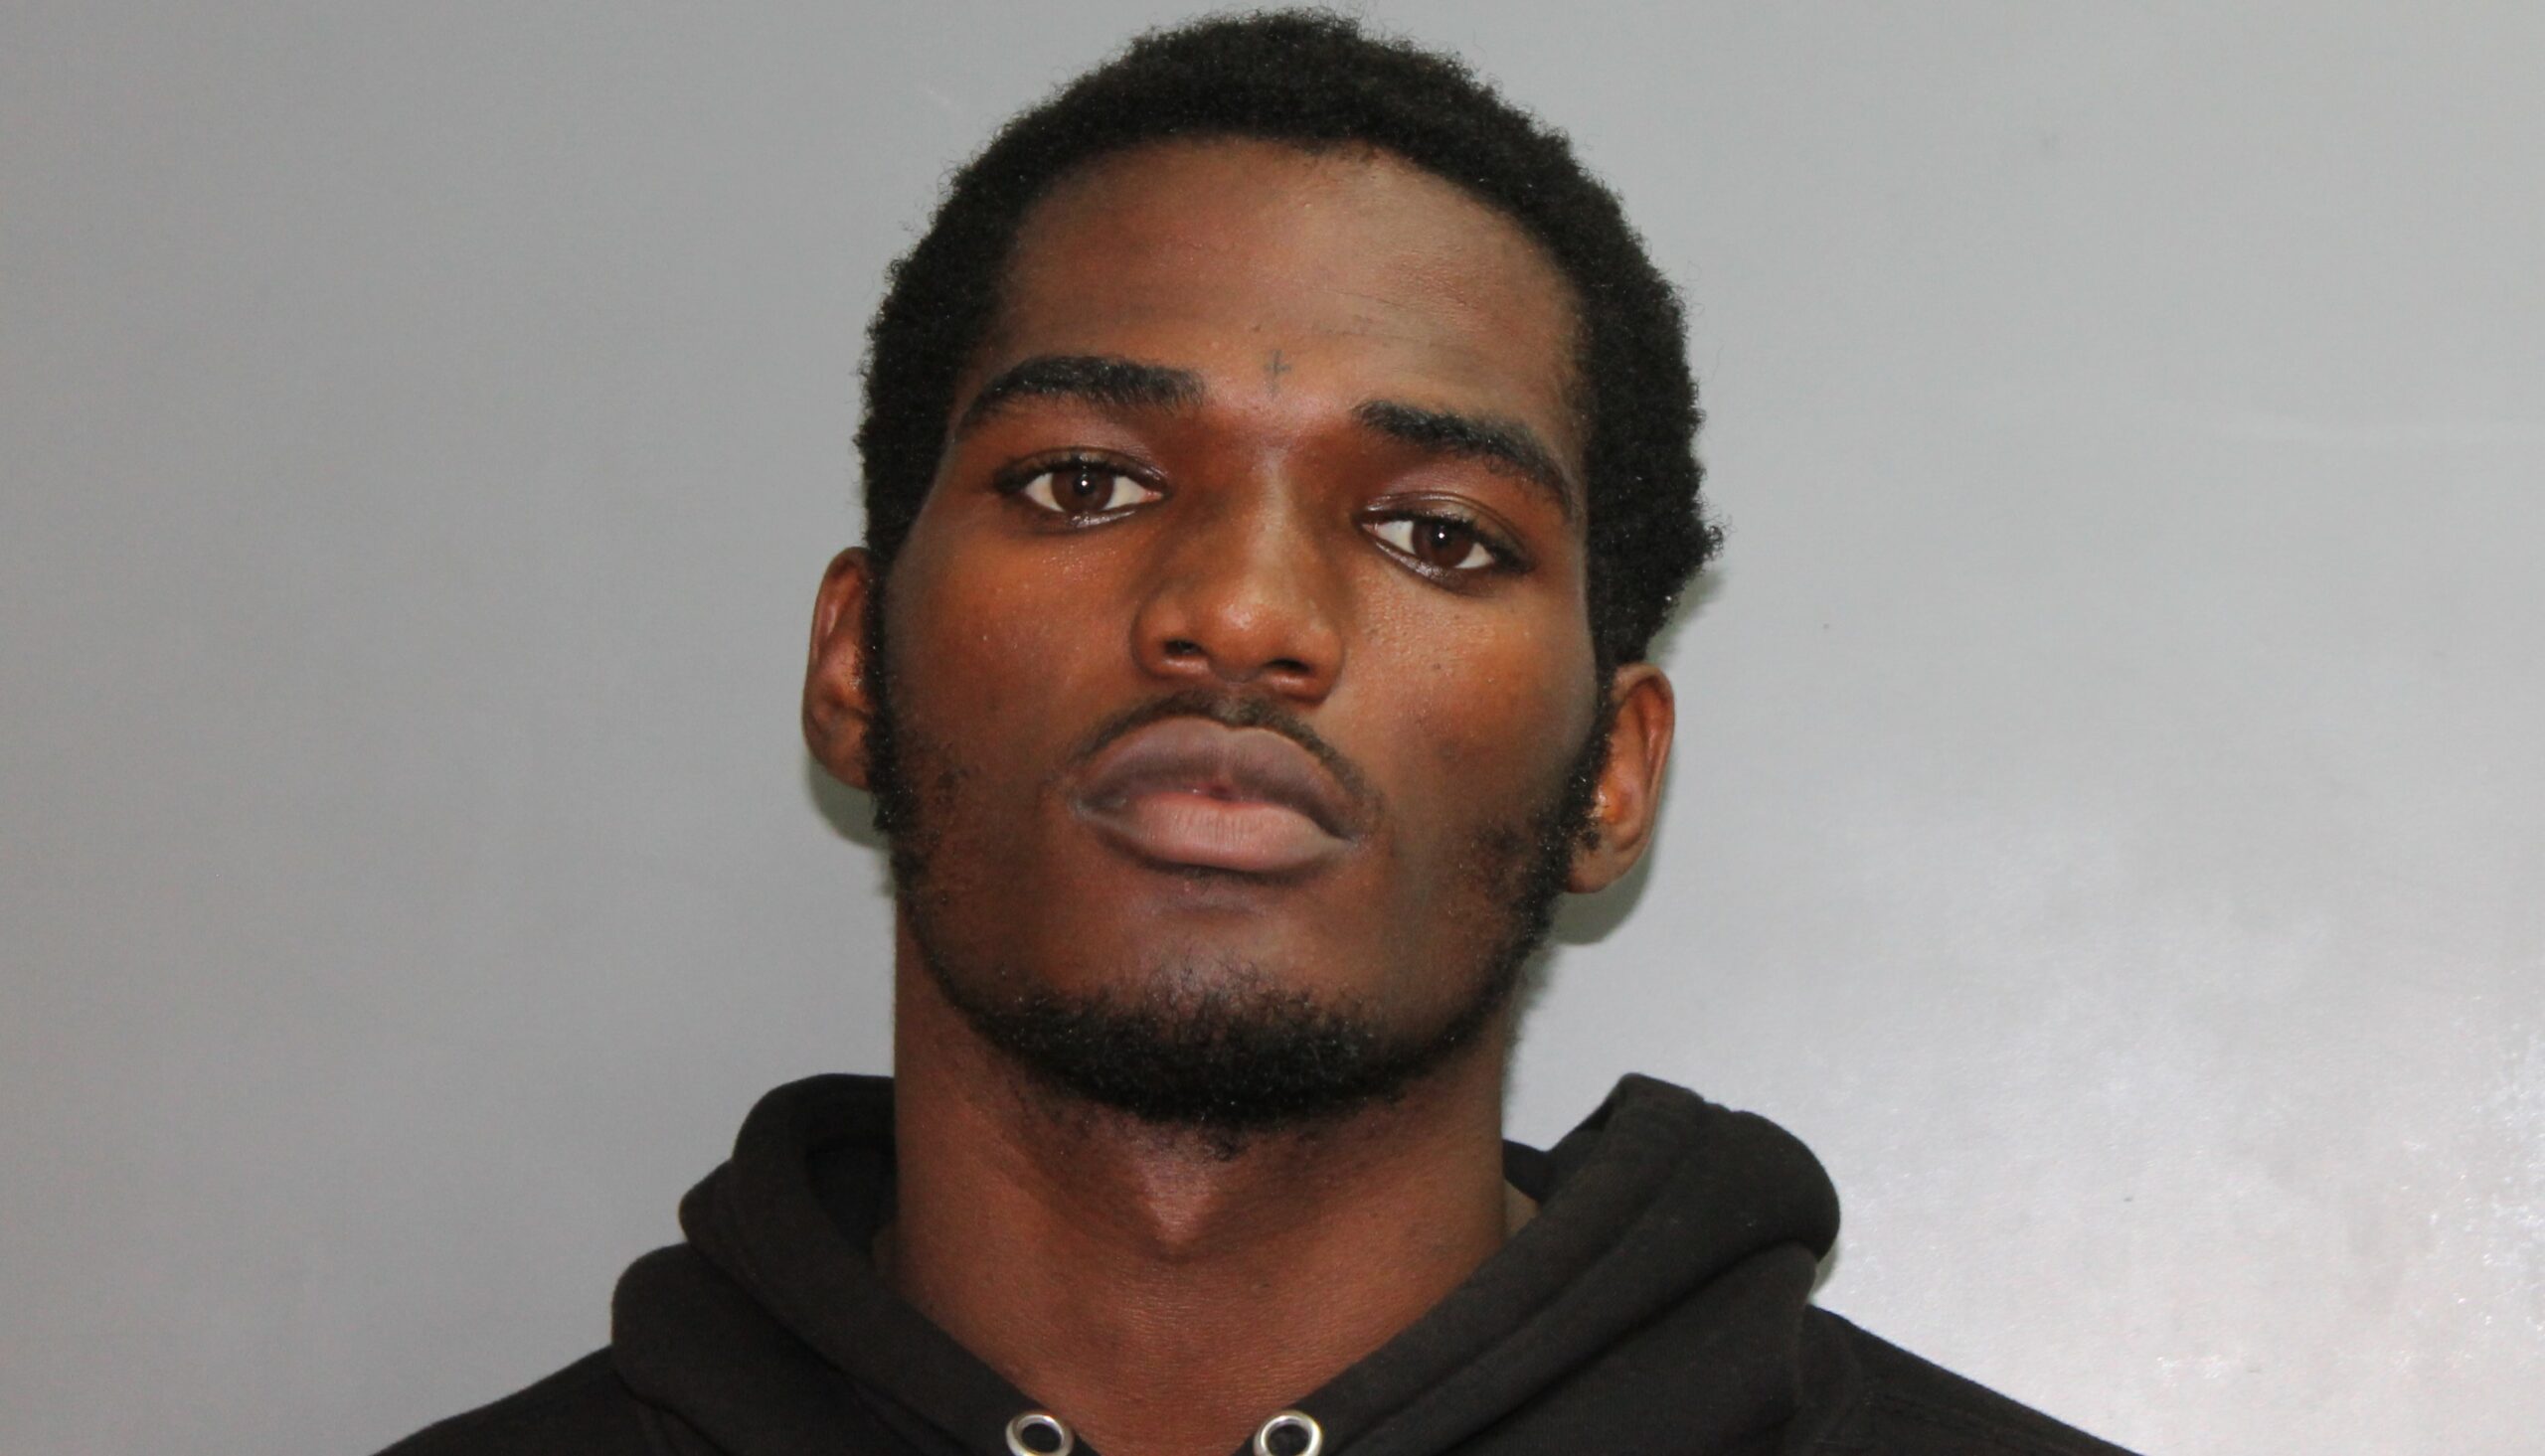 Police Need Your Help To Find Abijah Isaac On St. Croix Regarding A Burglary